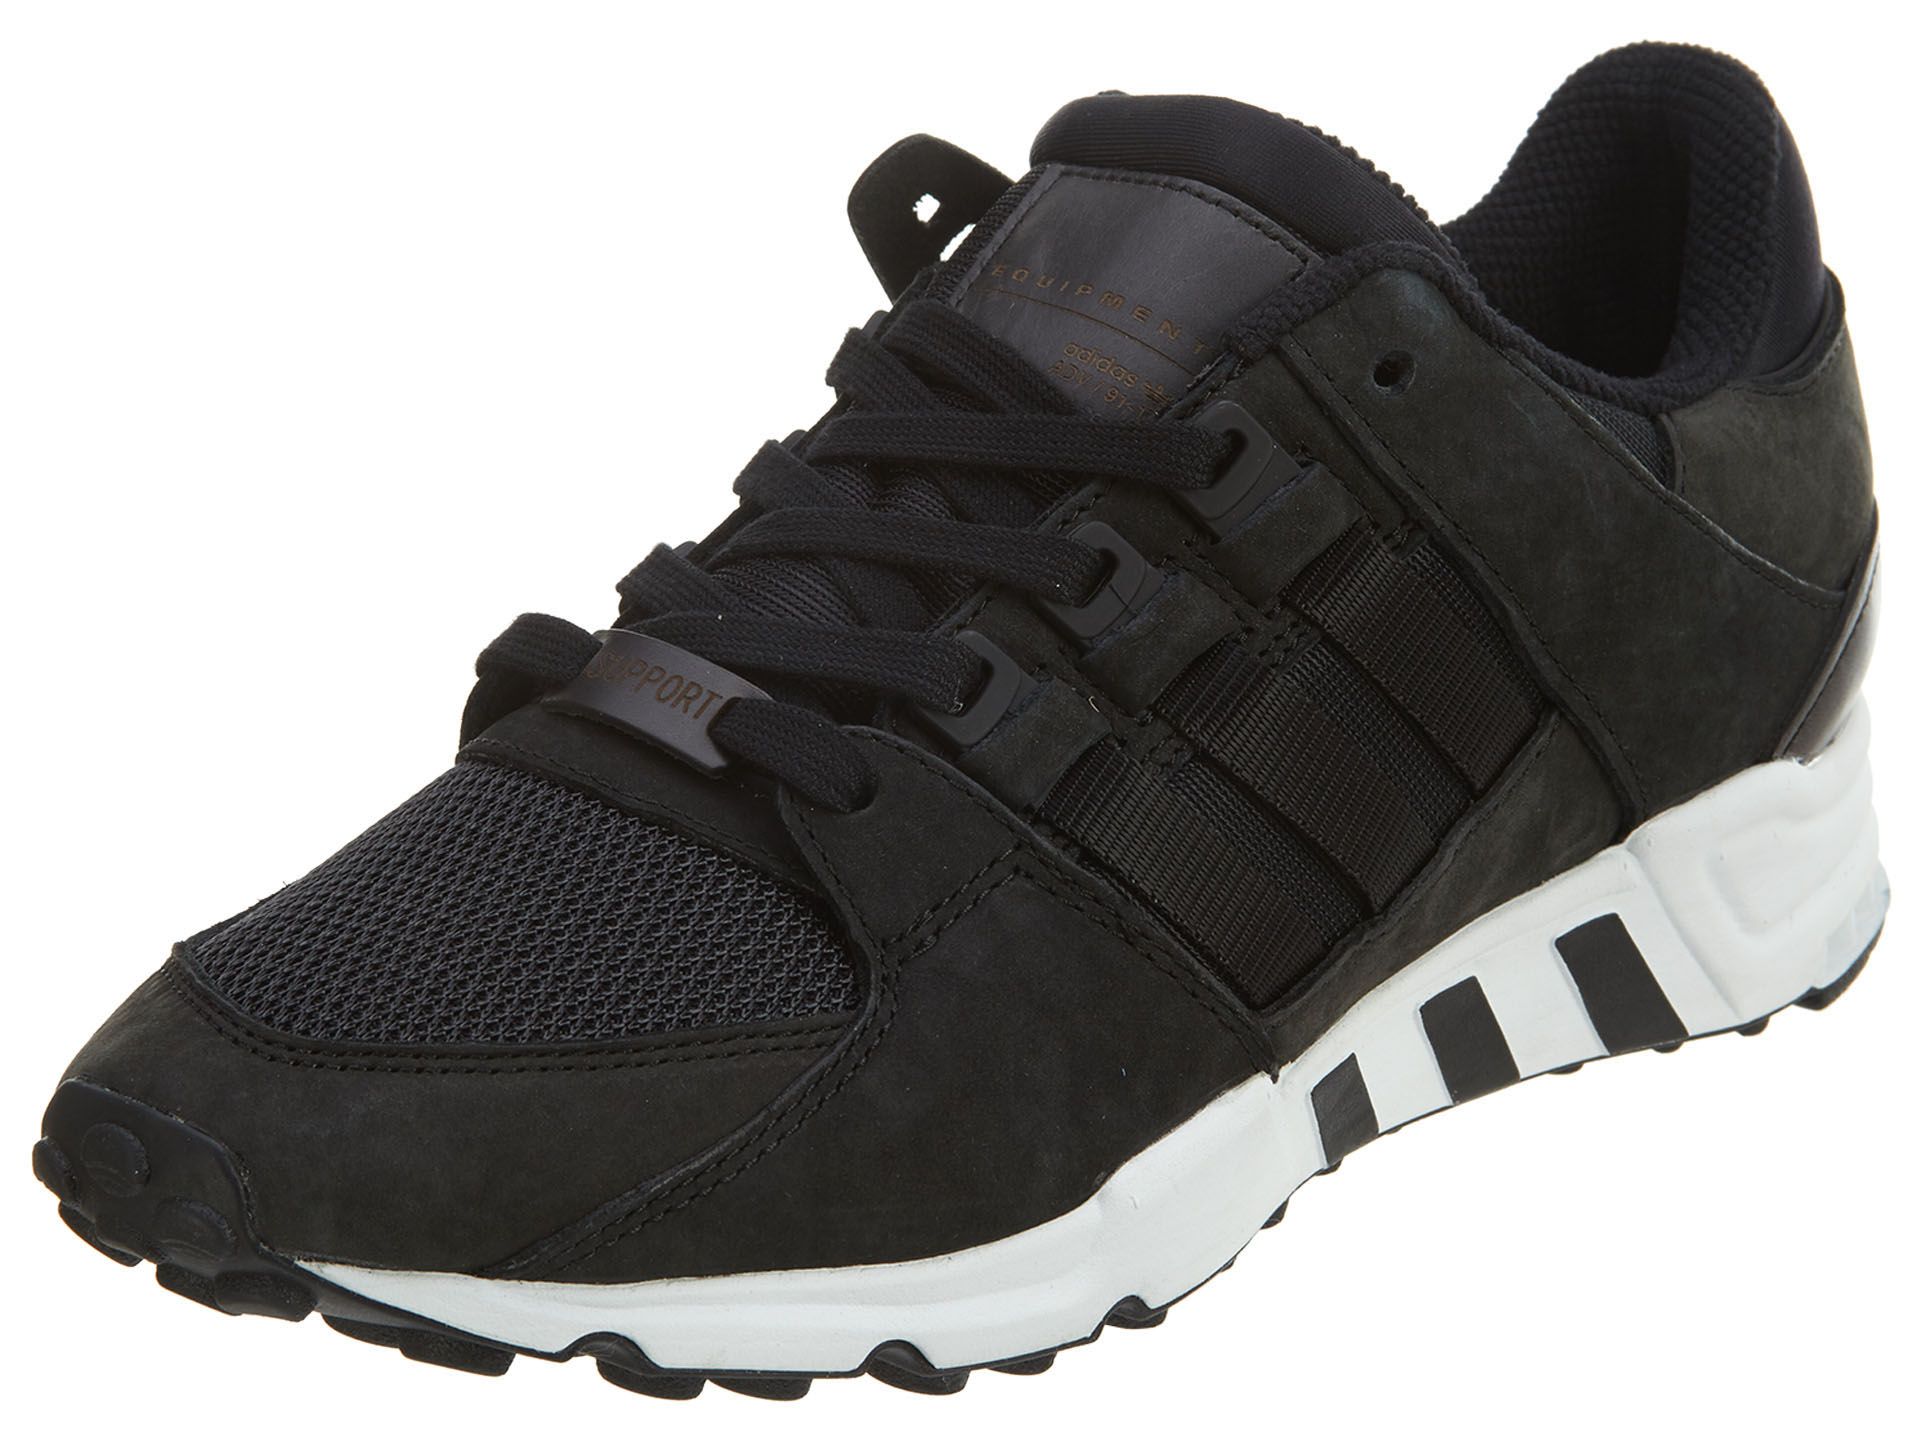 Adidas Eqt Support Rf Mens Style 